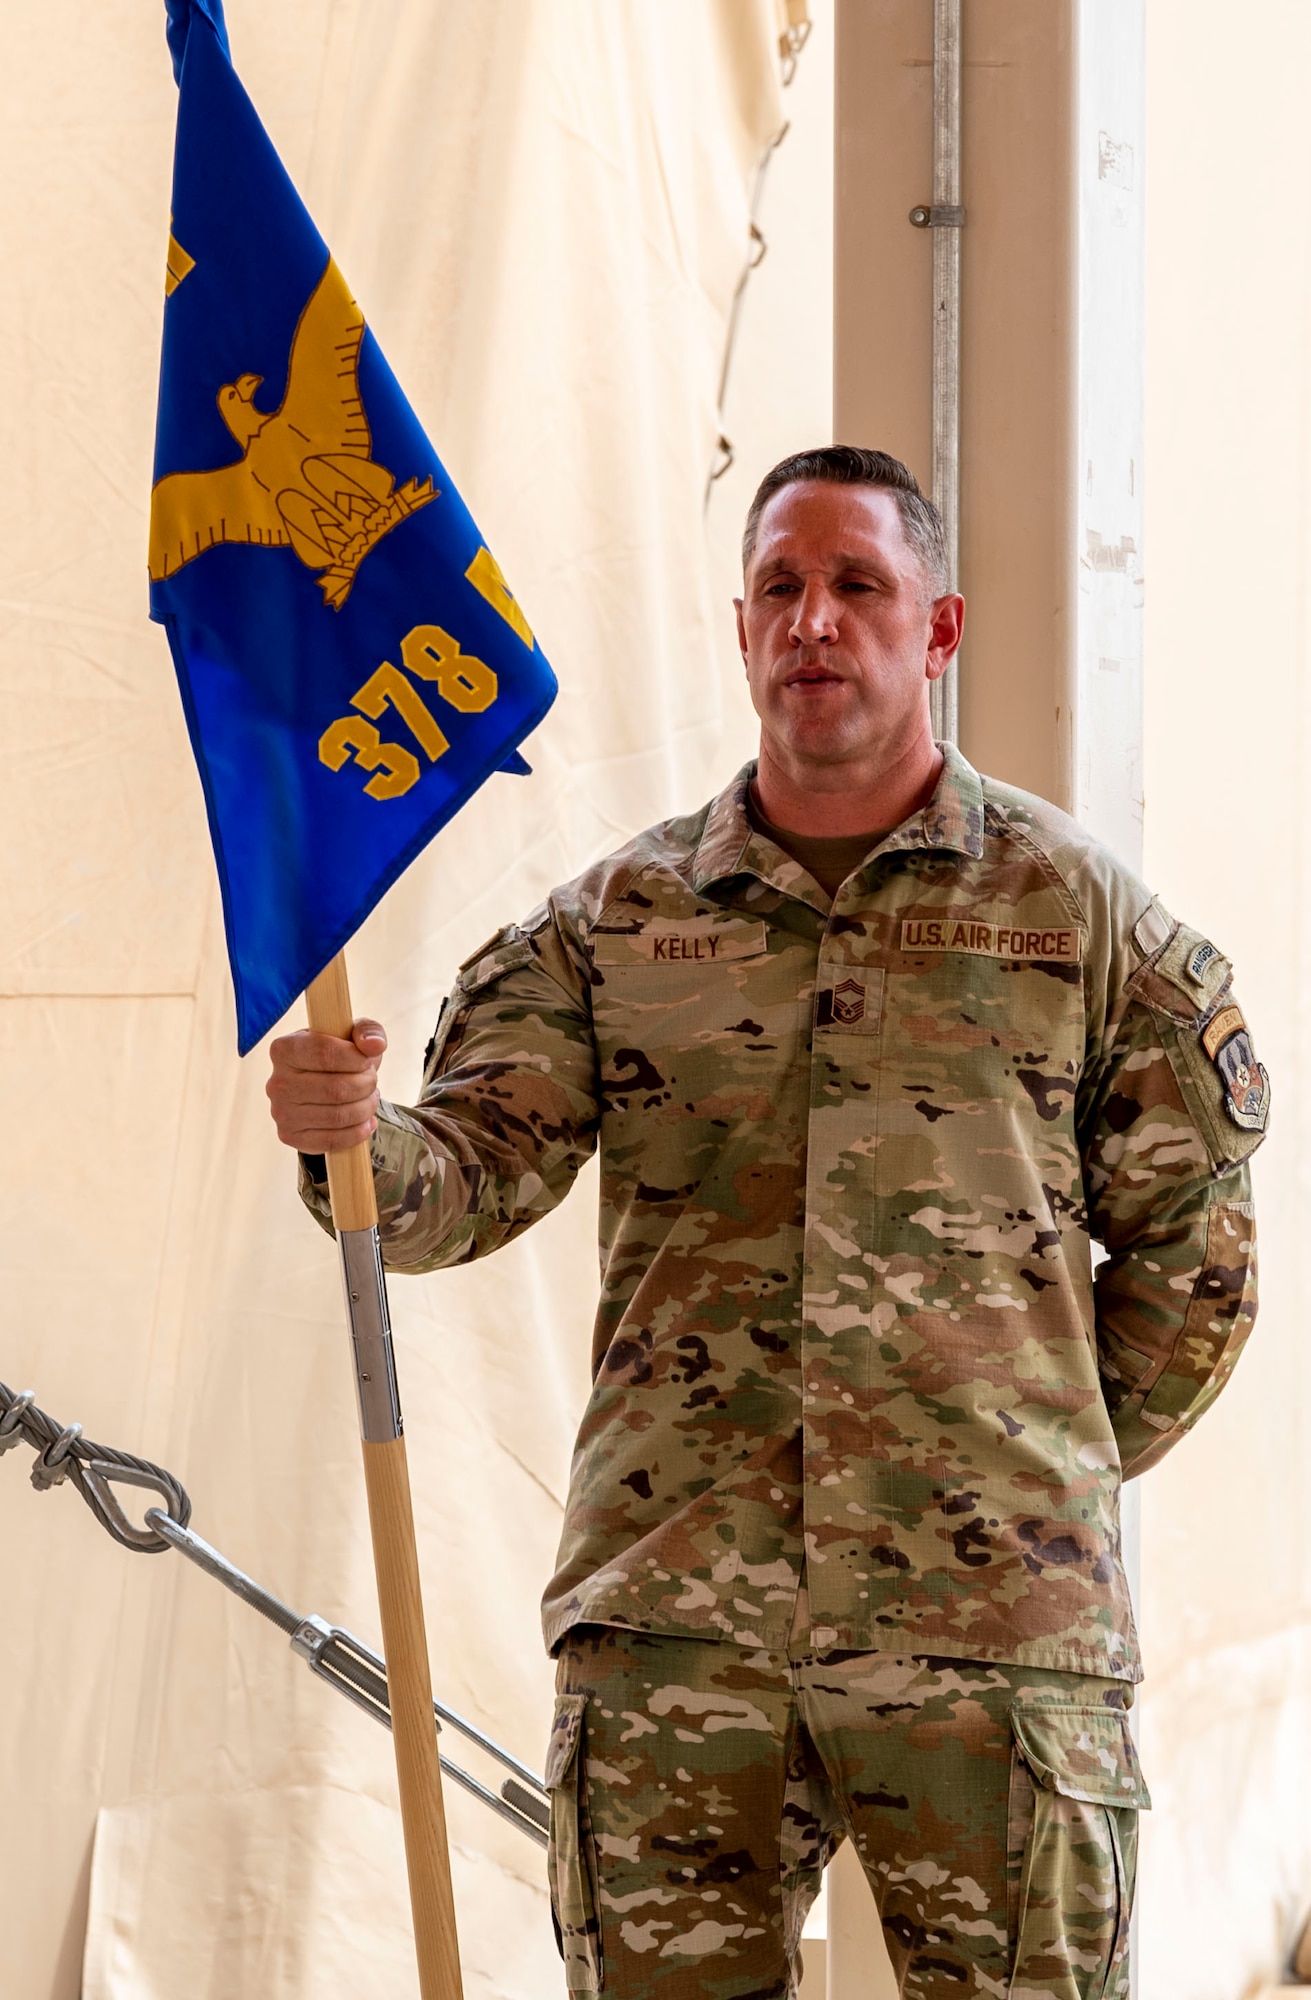 U.S. Air Force Chief Master Sgt. William Kelly, 378th Air Expeditionary Wing command chief, holds the guidon during a change of command ceremony at Prince Sultan Air Base, Kingdom of Saudi Arabia, May 18, 2023. During the ceremony, Brig. Gen. William Betts relinquished command of the 378th AEW to Brig. Gen. Akshai Gandhi. The tradition of change of command ceremonies are to allow service members to witness their new leader assume the responsibility and trust associated with the position of commander. (U.S. Air Force photo by Senior Airman Stephani Barge)